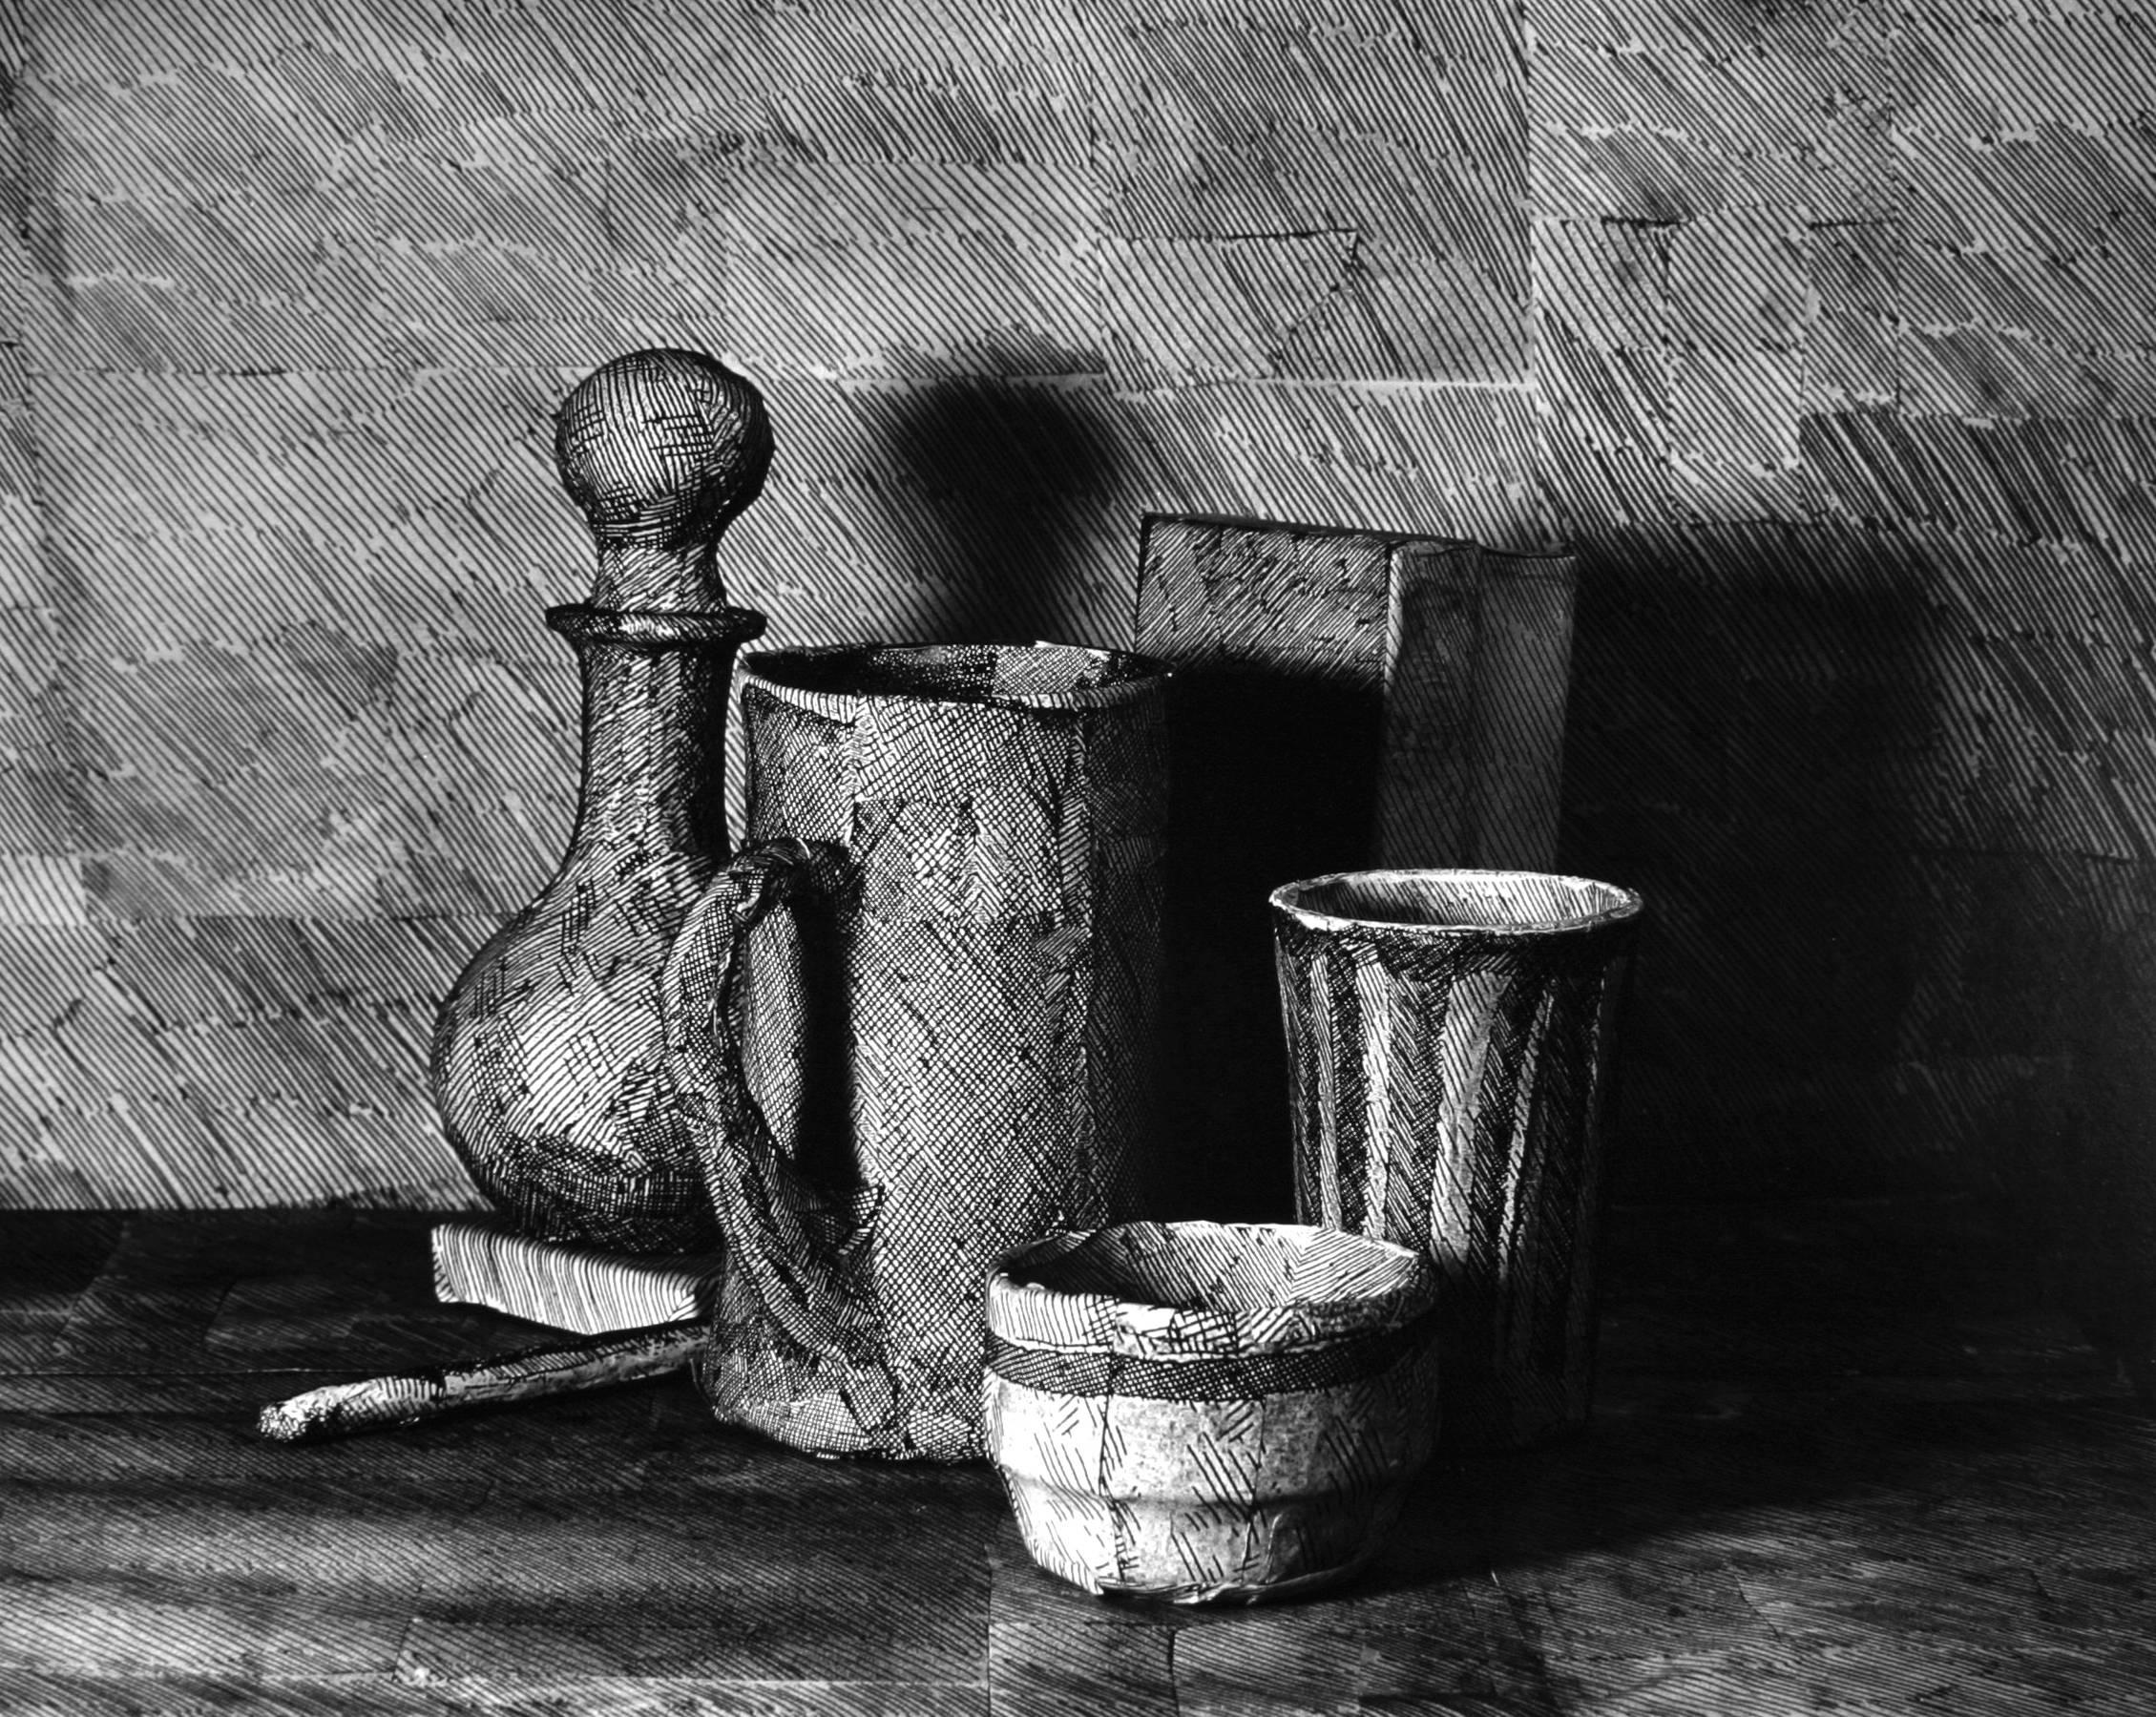 Alexandra Catiere Black and White Photograph - Photo of drawing on paper, wrapped around objects. Black and White photography.